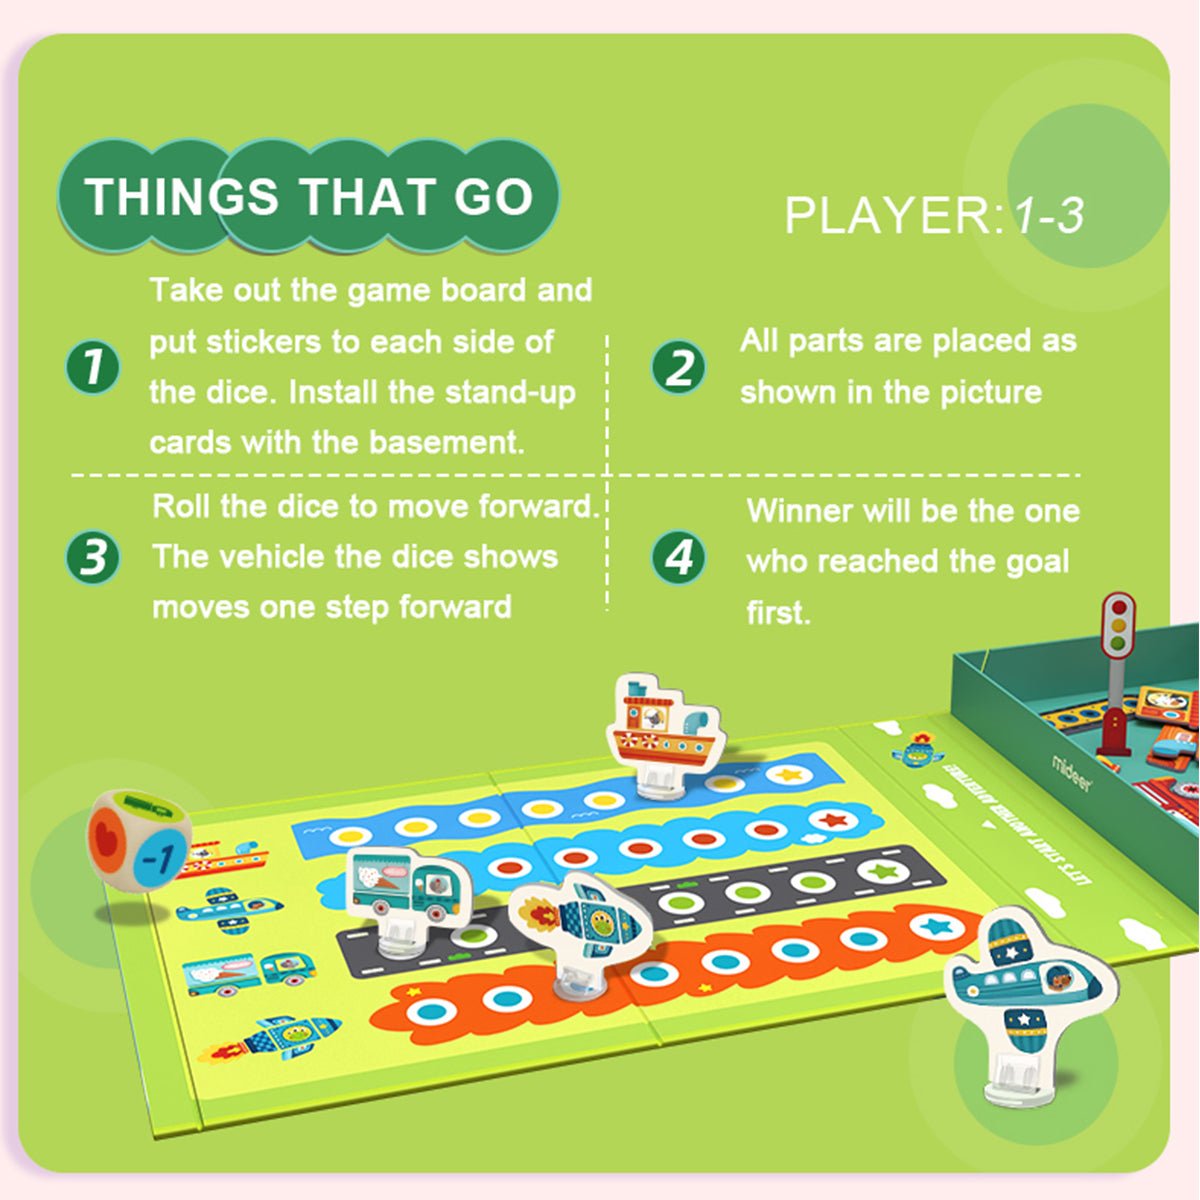 Things That Go Magenetic Playset - 0cm